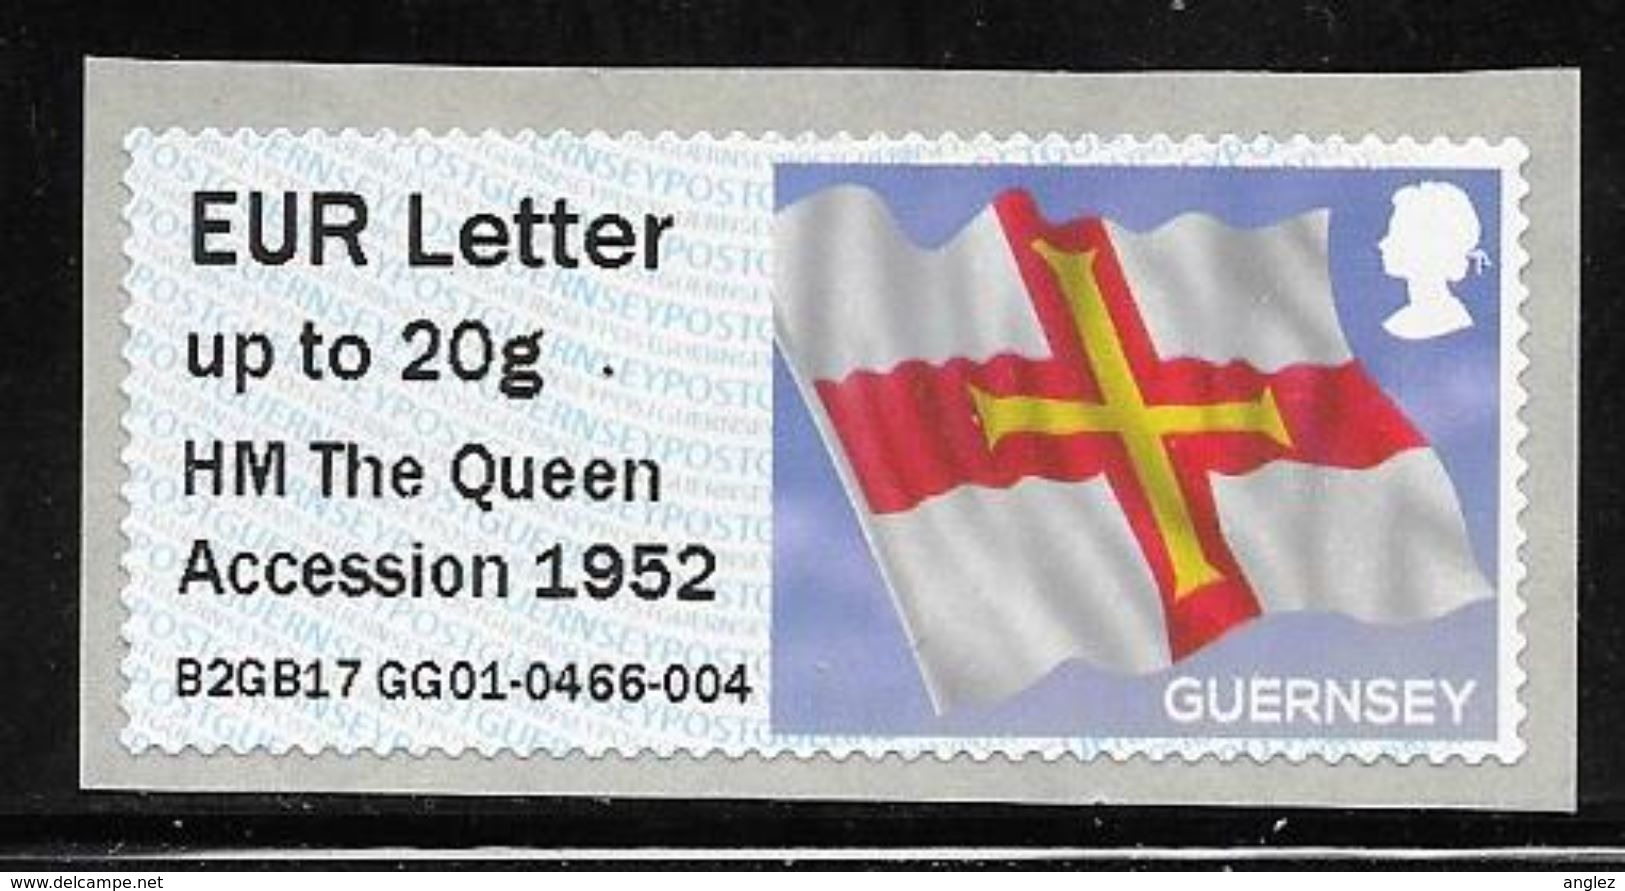 Guernsey Post & Go ATM - Flag - HM The Queen Accession 1952 Overprint - EU Letter 20g MNH - Guernesey